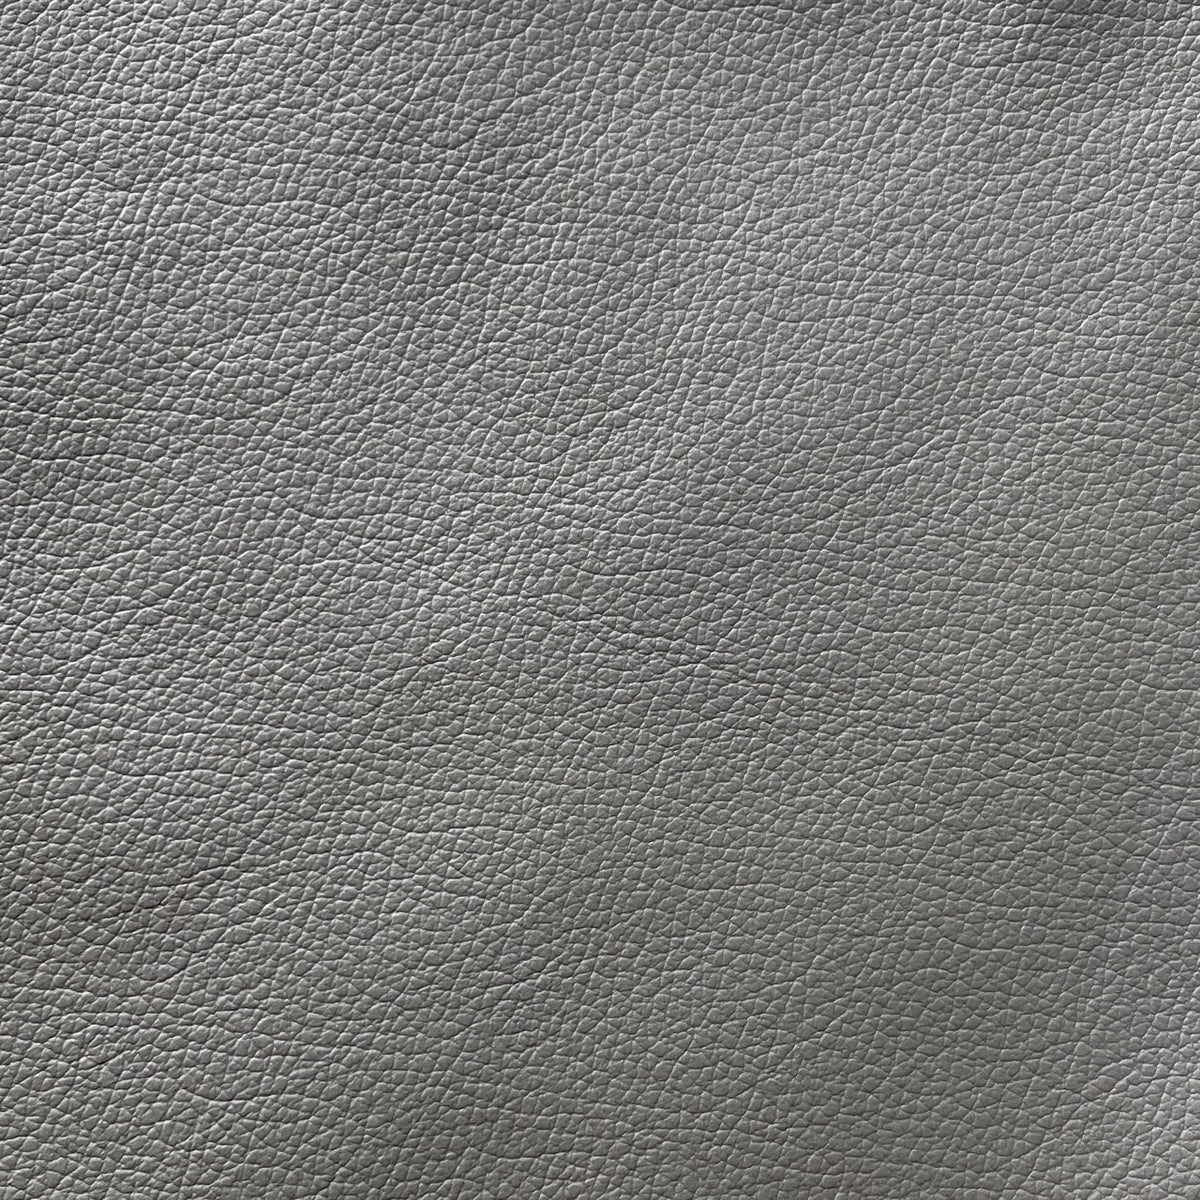 Upholstery Cow Hide #33 | Grey | 0.9 mm | 5.02, 5.71 sq.m | $368 and $424 ea.